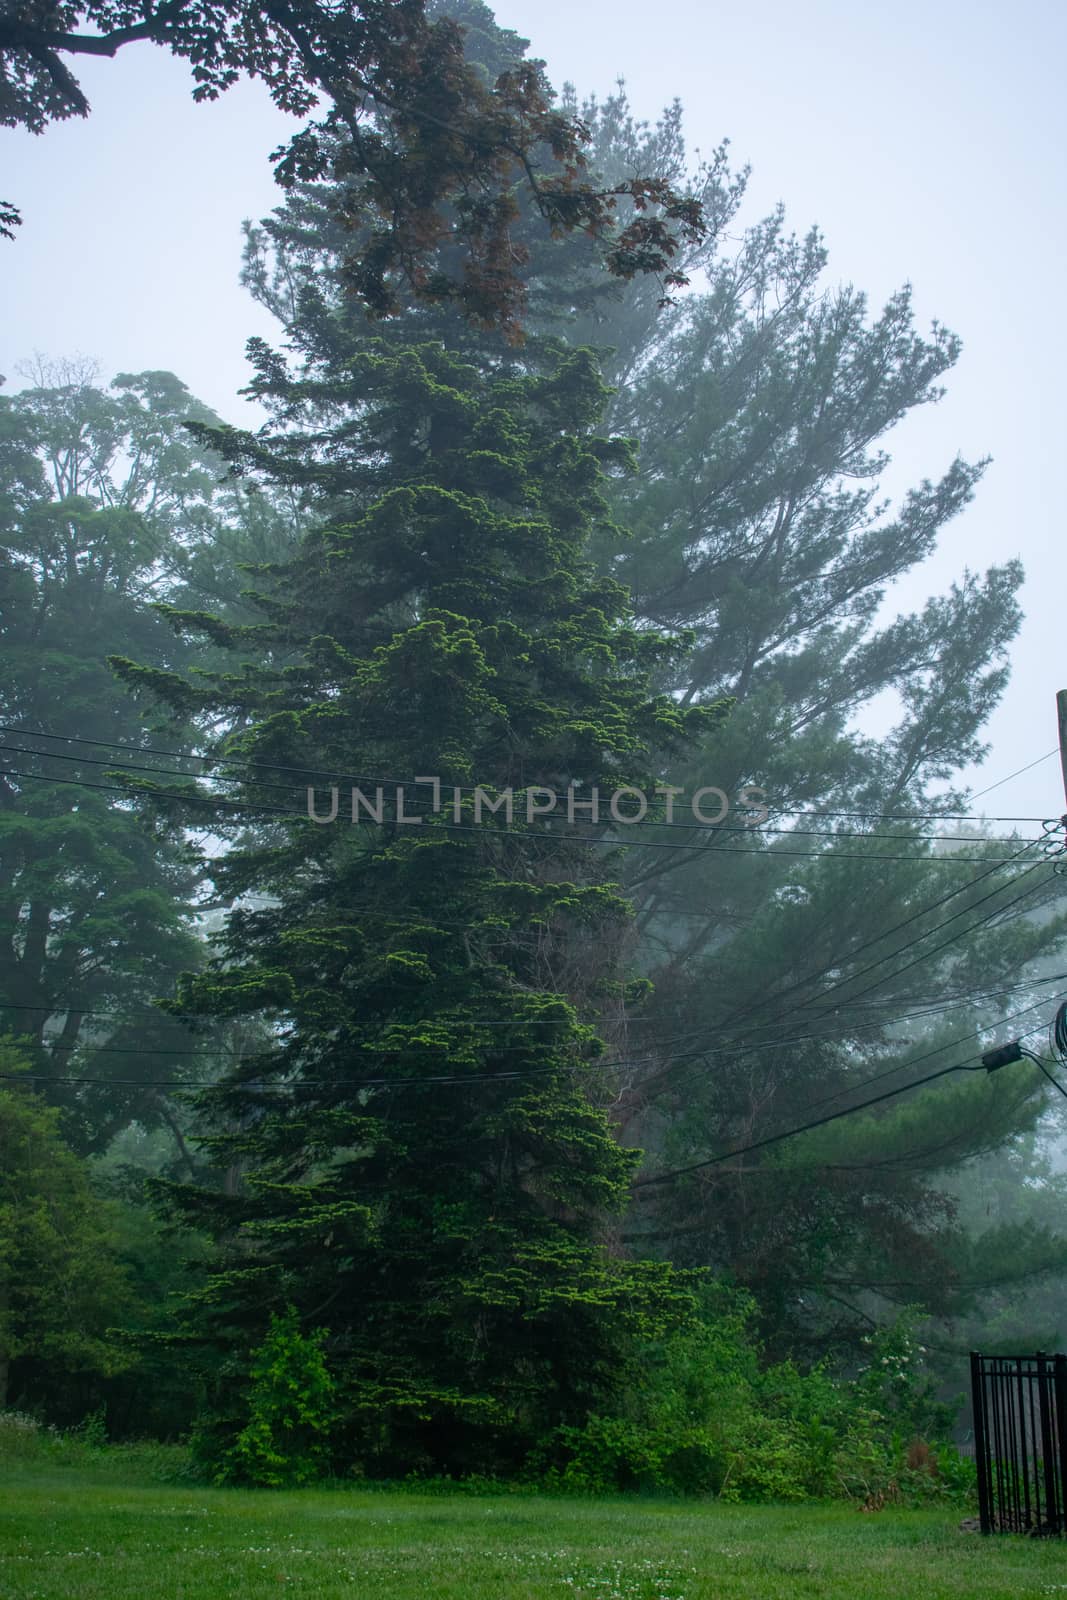 A Tall Green Tree on a Foggy Day in a Suburban Backyard by bju12290